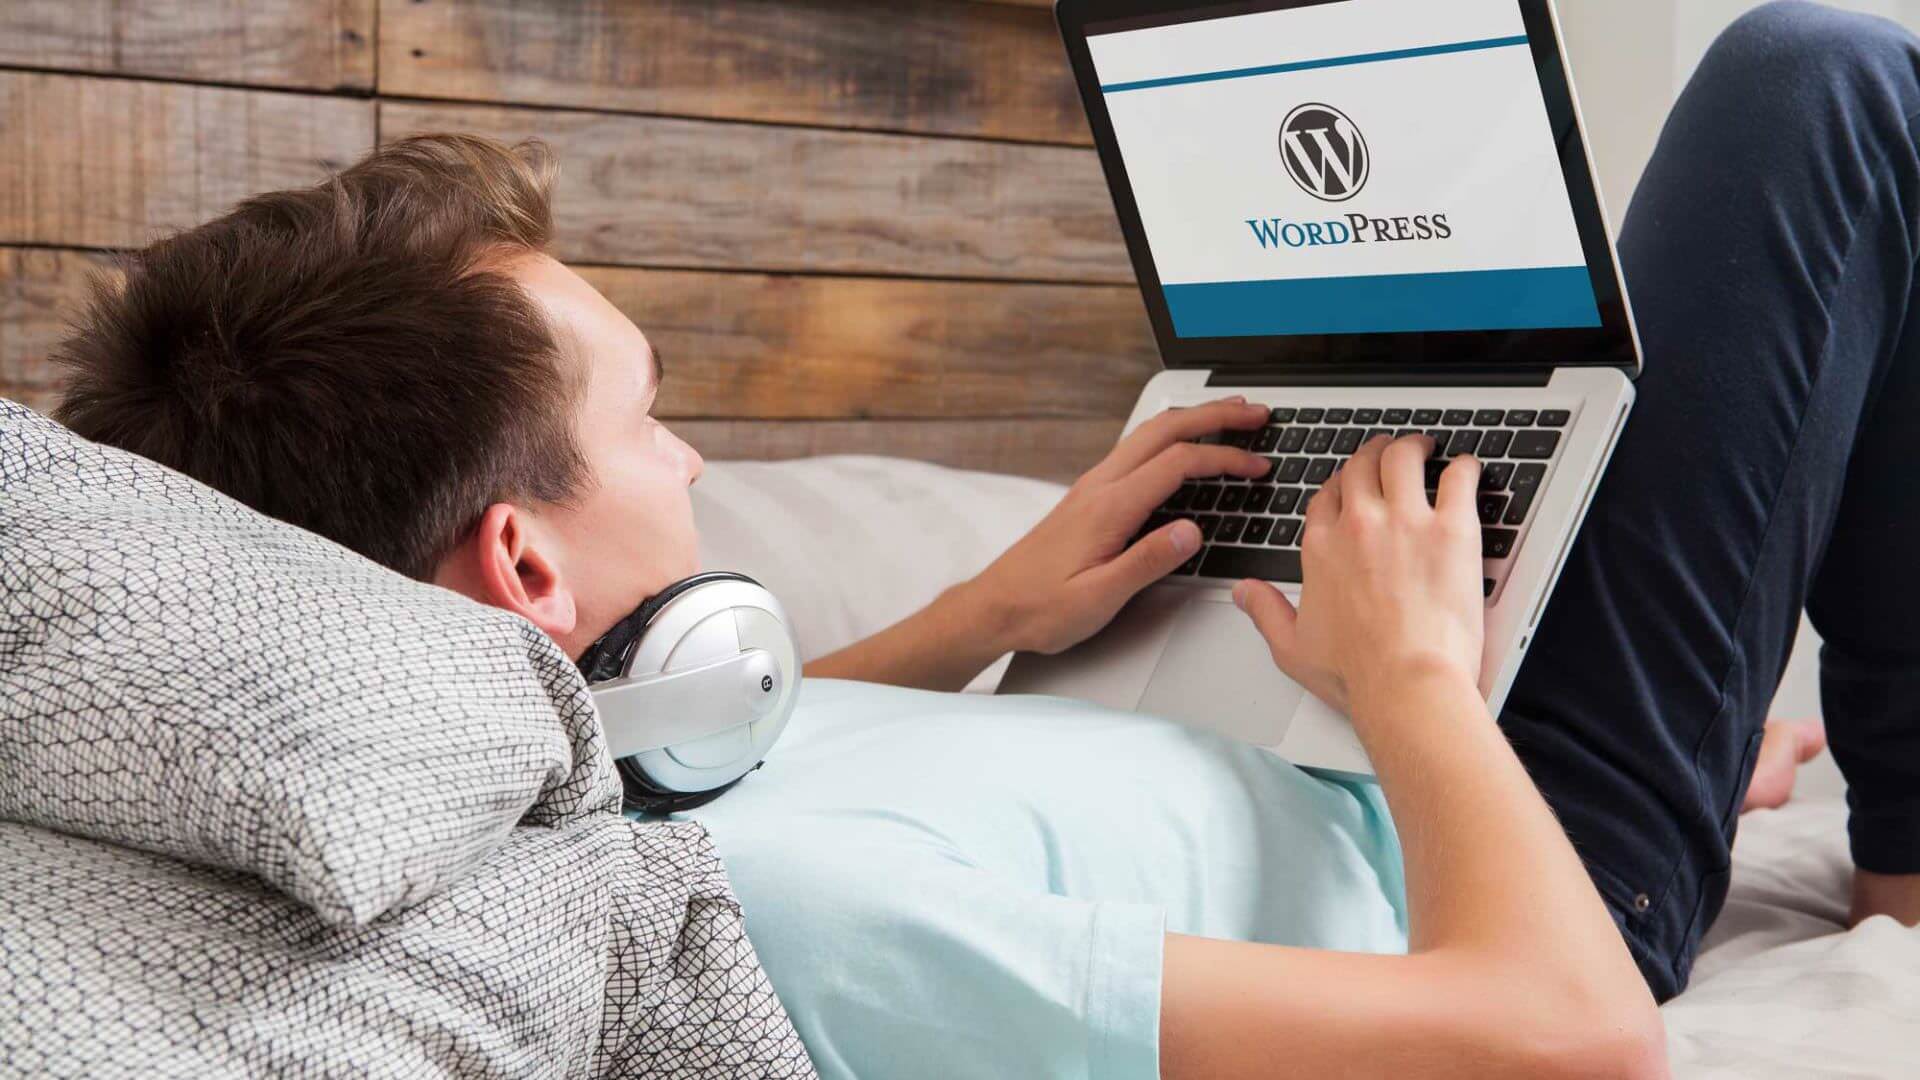 WordPress: Much Required For Web Content Development